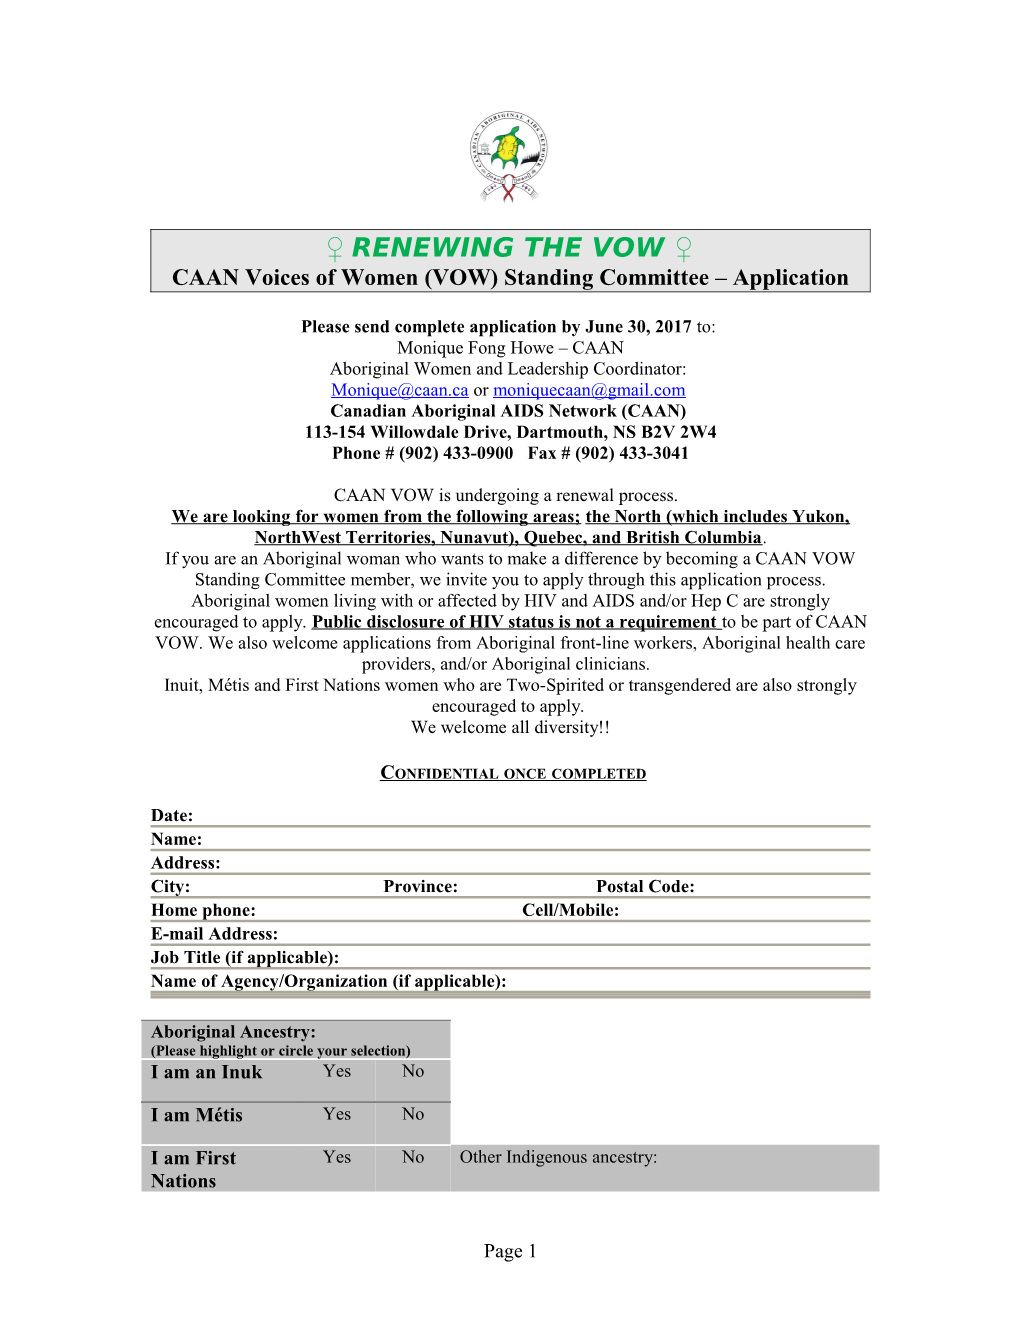 CAAN Voices of Women (VOW) Standing Committee Application